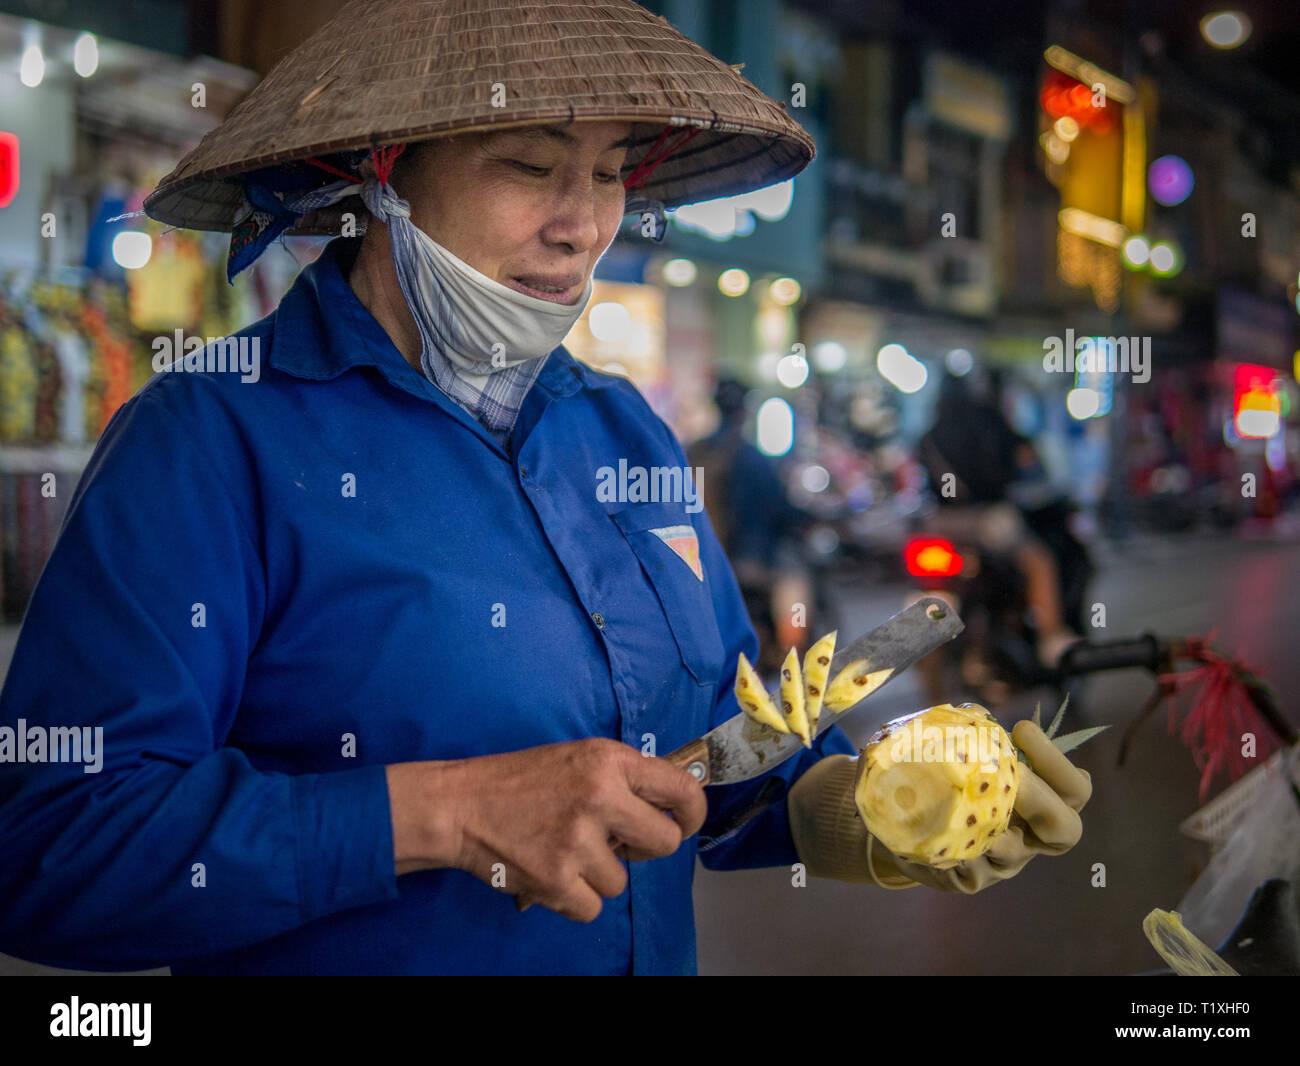 Vietnamese woman with classic conical hat preparing and slicing pineapple at night market in Hanoi, Vietnam Stock Photo